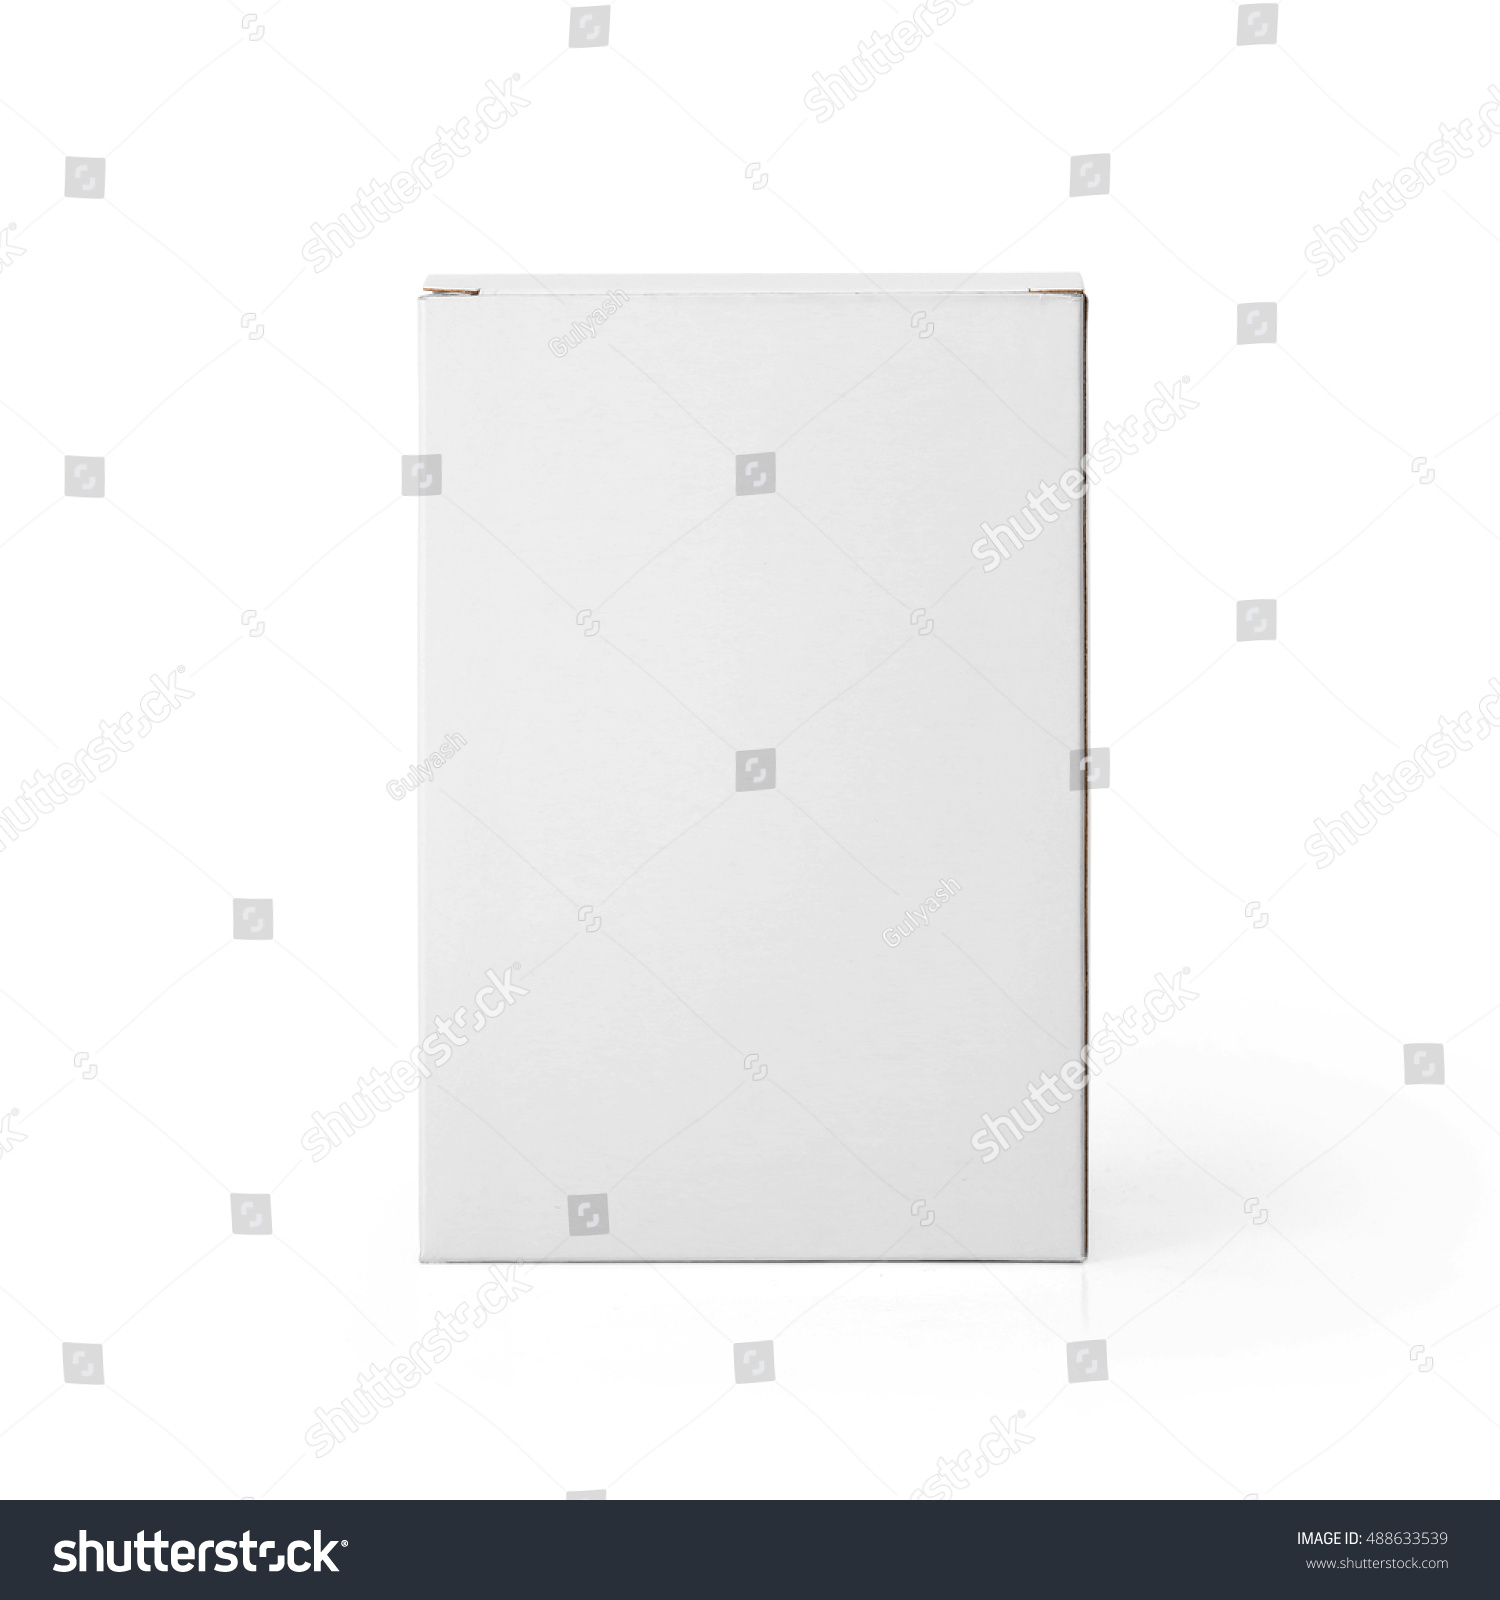 Download Blank White Cardboard Box Front View Stock Photo 488633539 ...